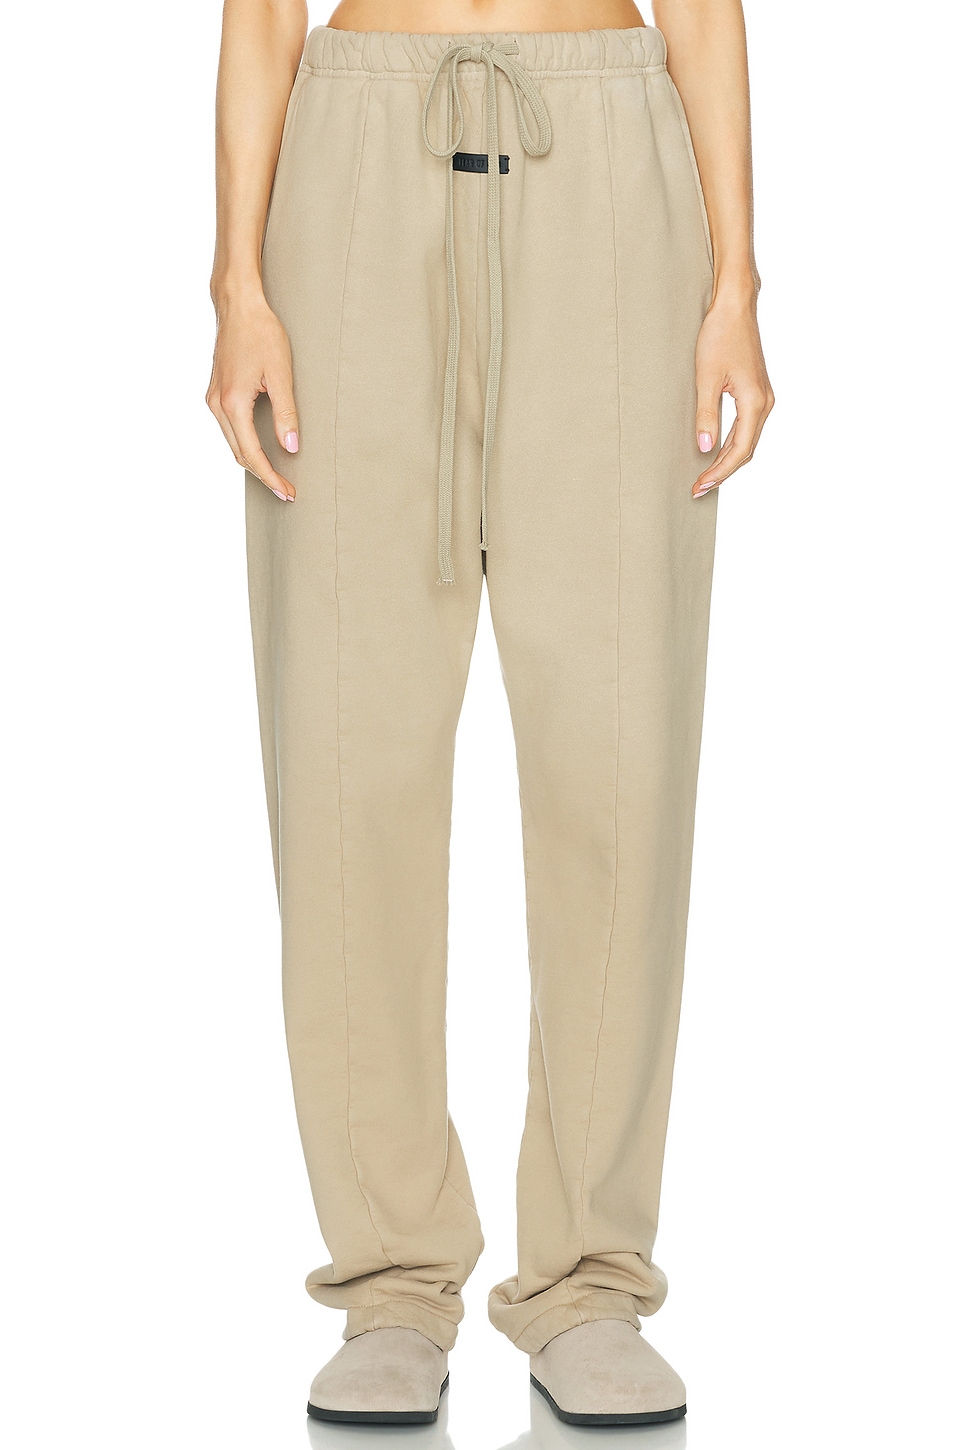 Image 1 of Fear of God Forum Sweatpant in Camel